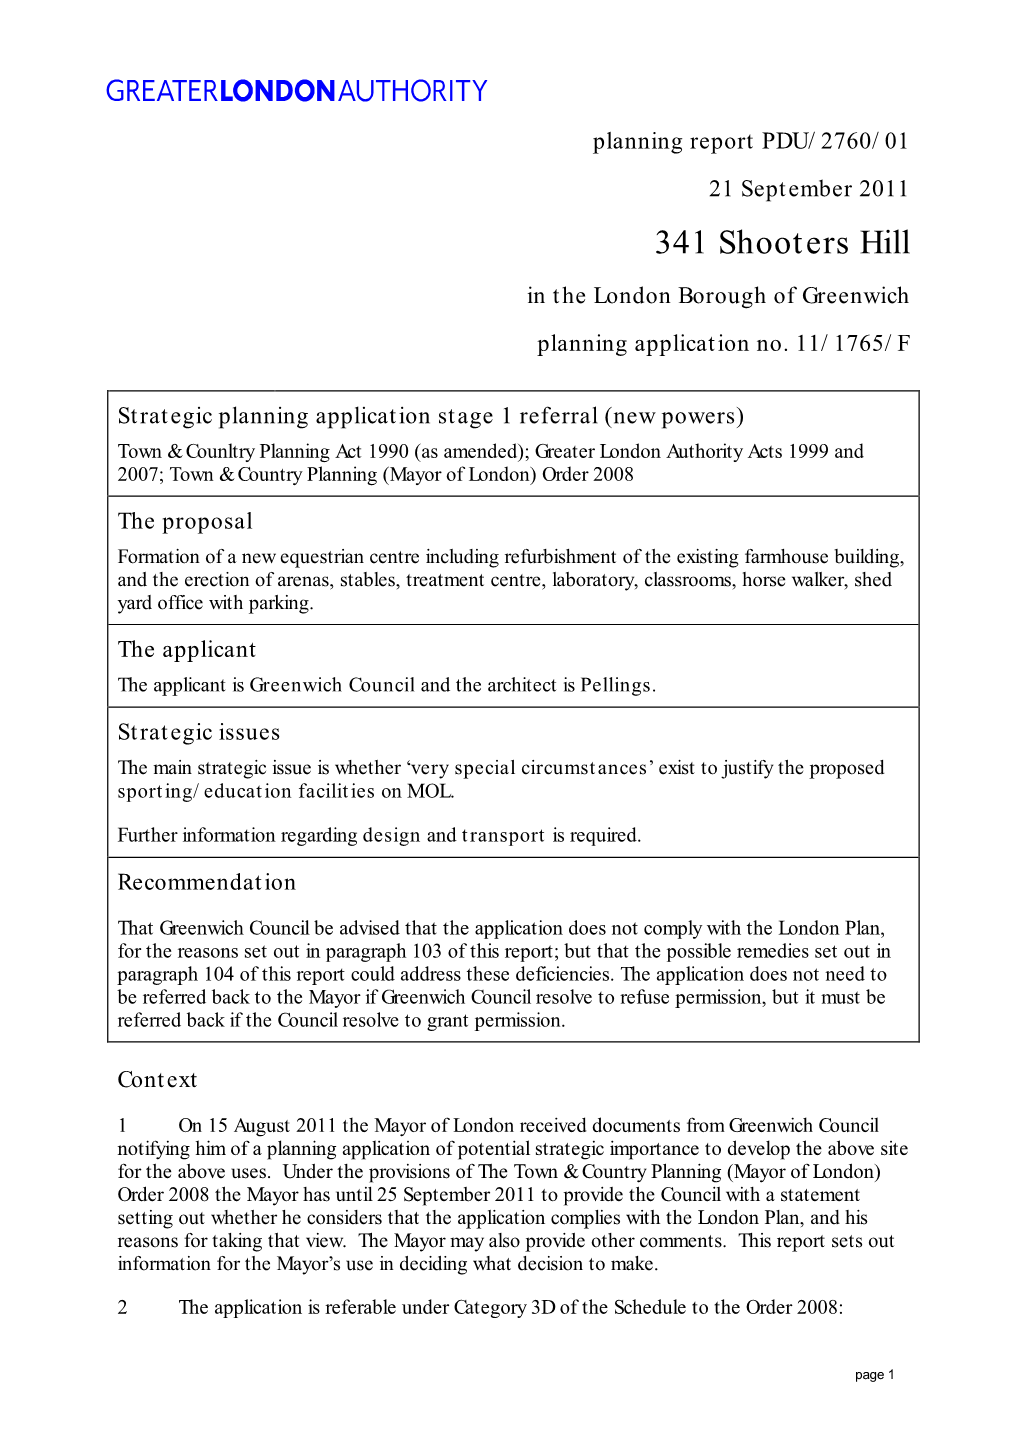 341 Shooters Hill in the London Borough of Greenwich Planning Application No